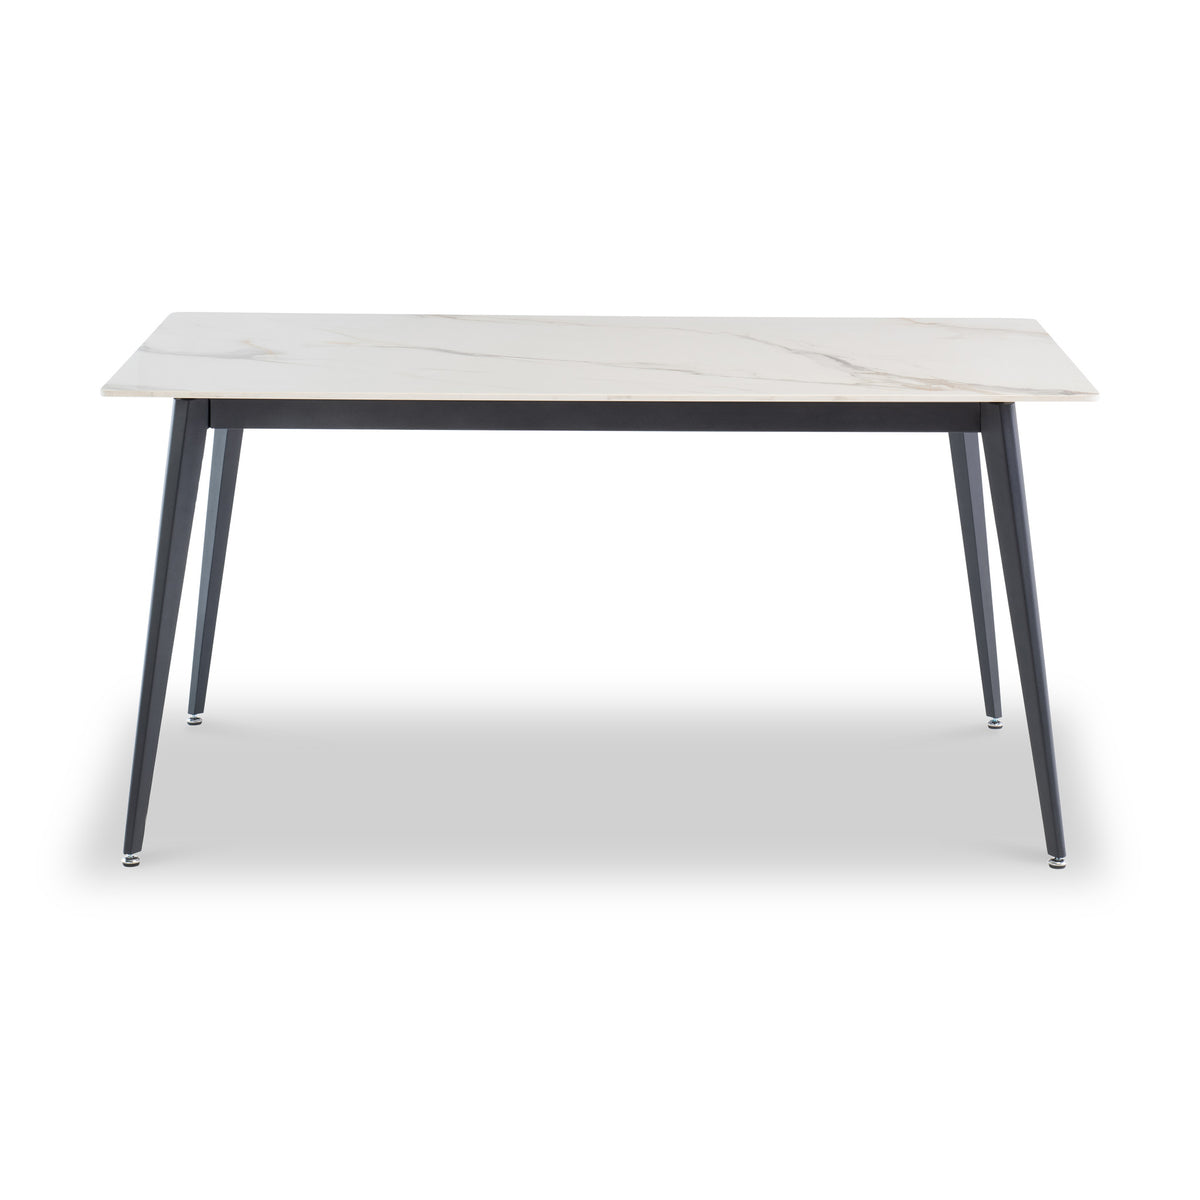 Owen White 160cm Sintered Stone Dining Table  from Roseland Furniture